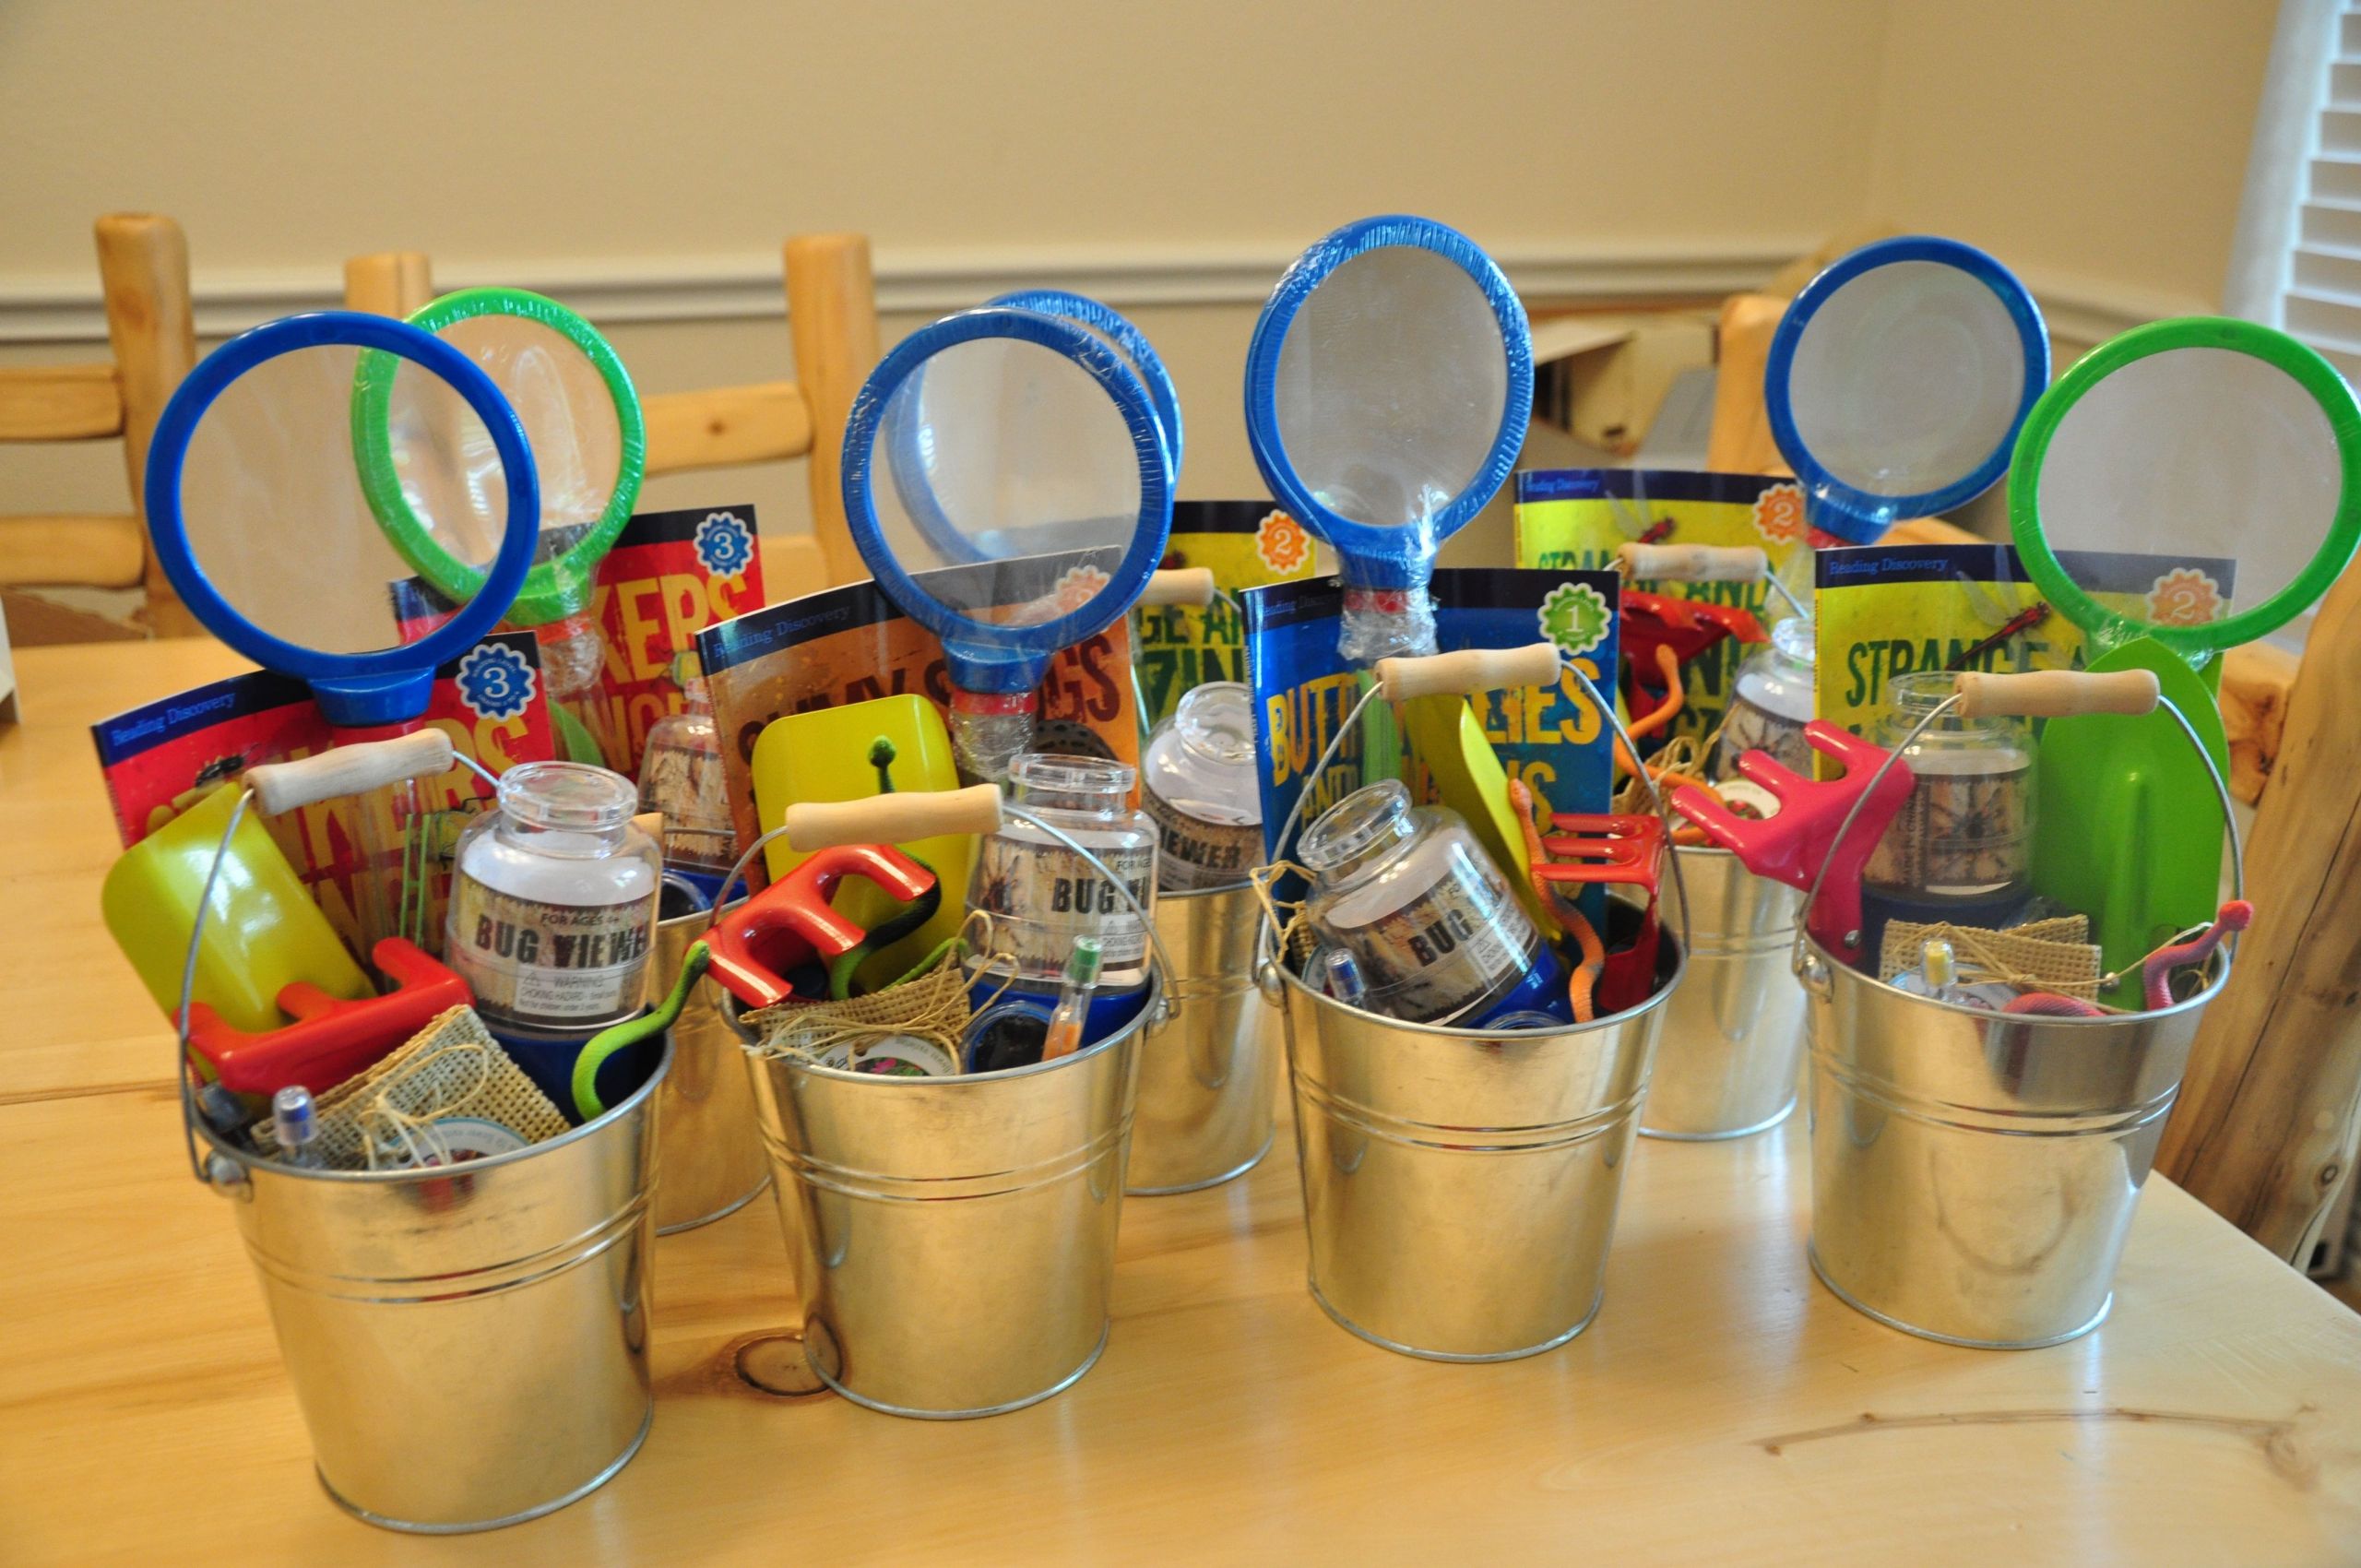 Birthday Party Ideas For 6 Year Old
 My 6 year old s "BUG party" birthday party favors